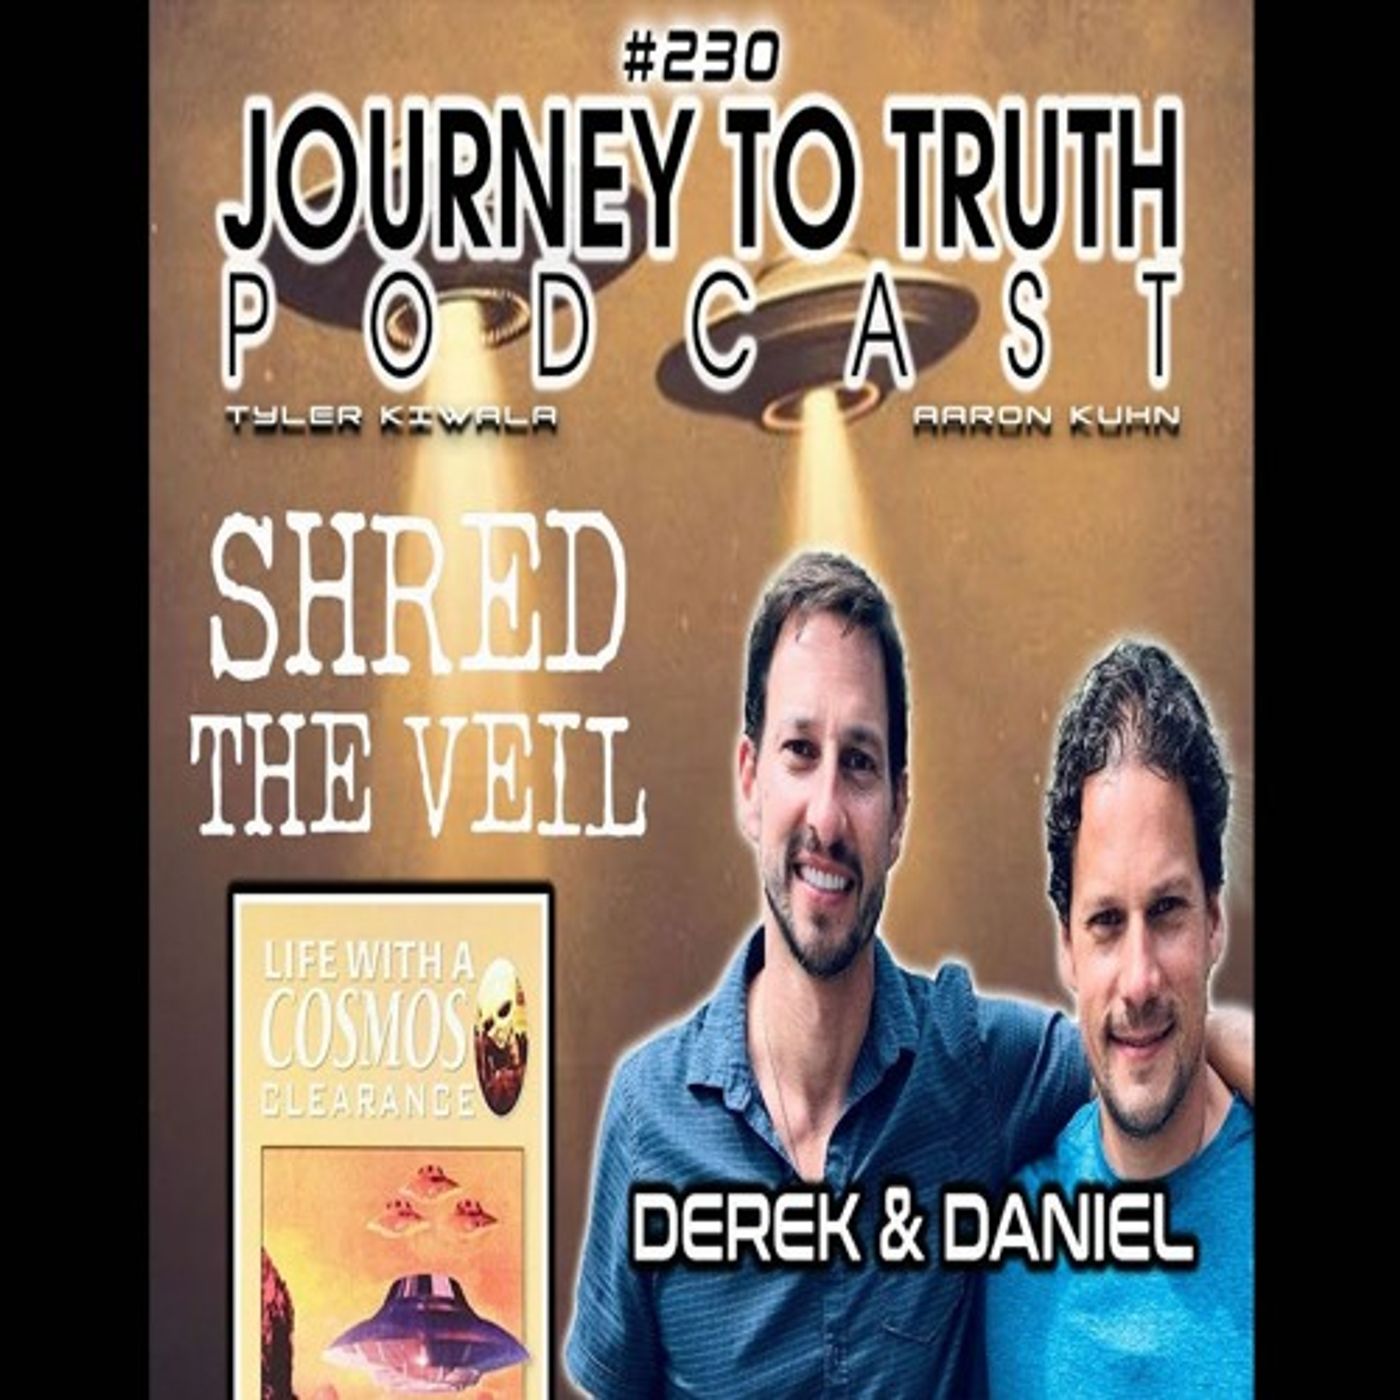 EP 230 - LIVE w/ Derek & Daniel: Shred The Veil - Life With A Cosmos Clearance